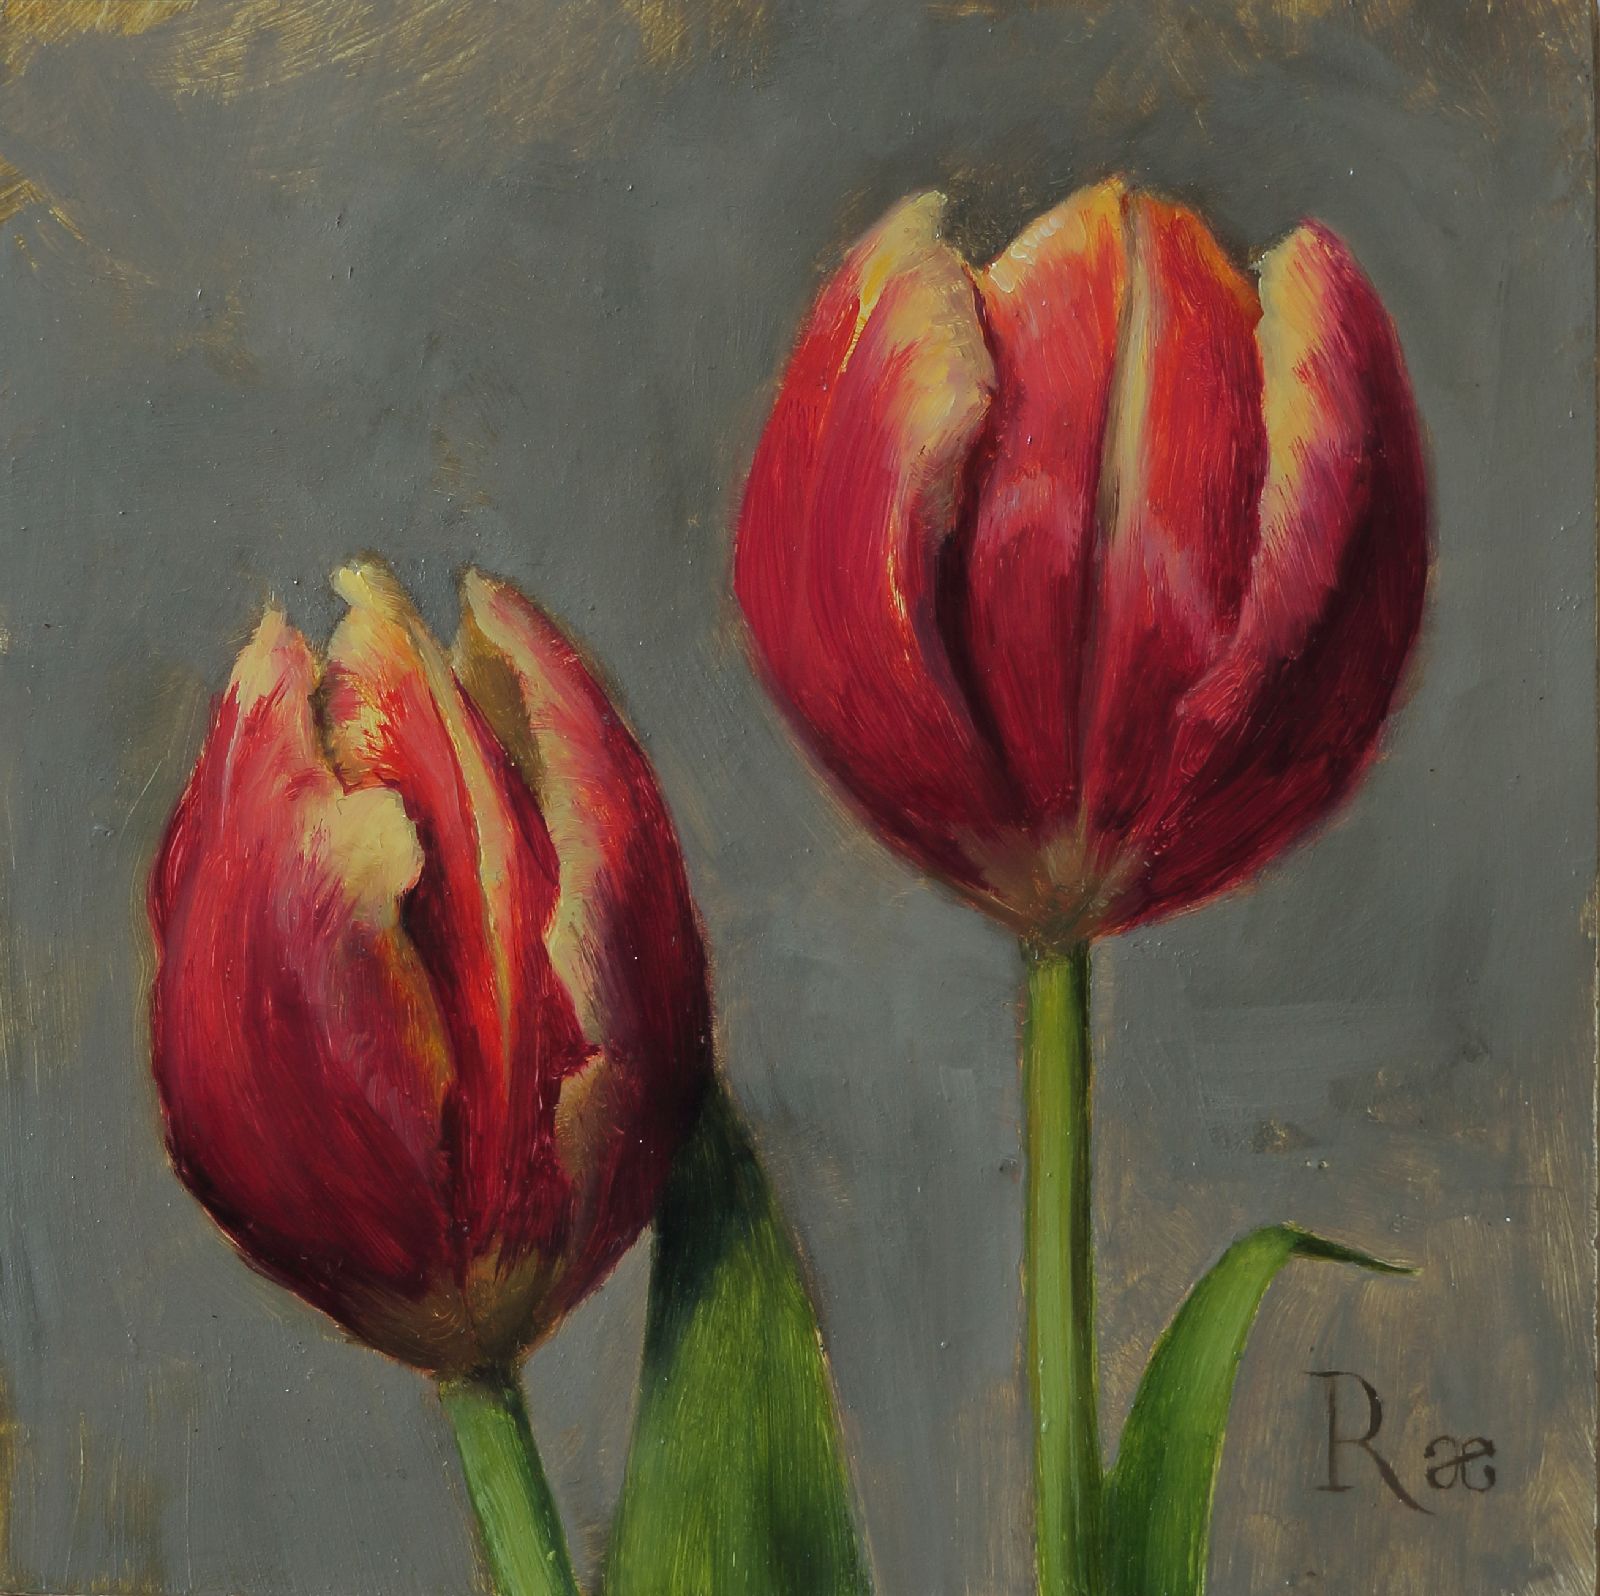 Red Tulips by Rae Perry